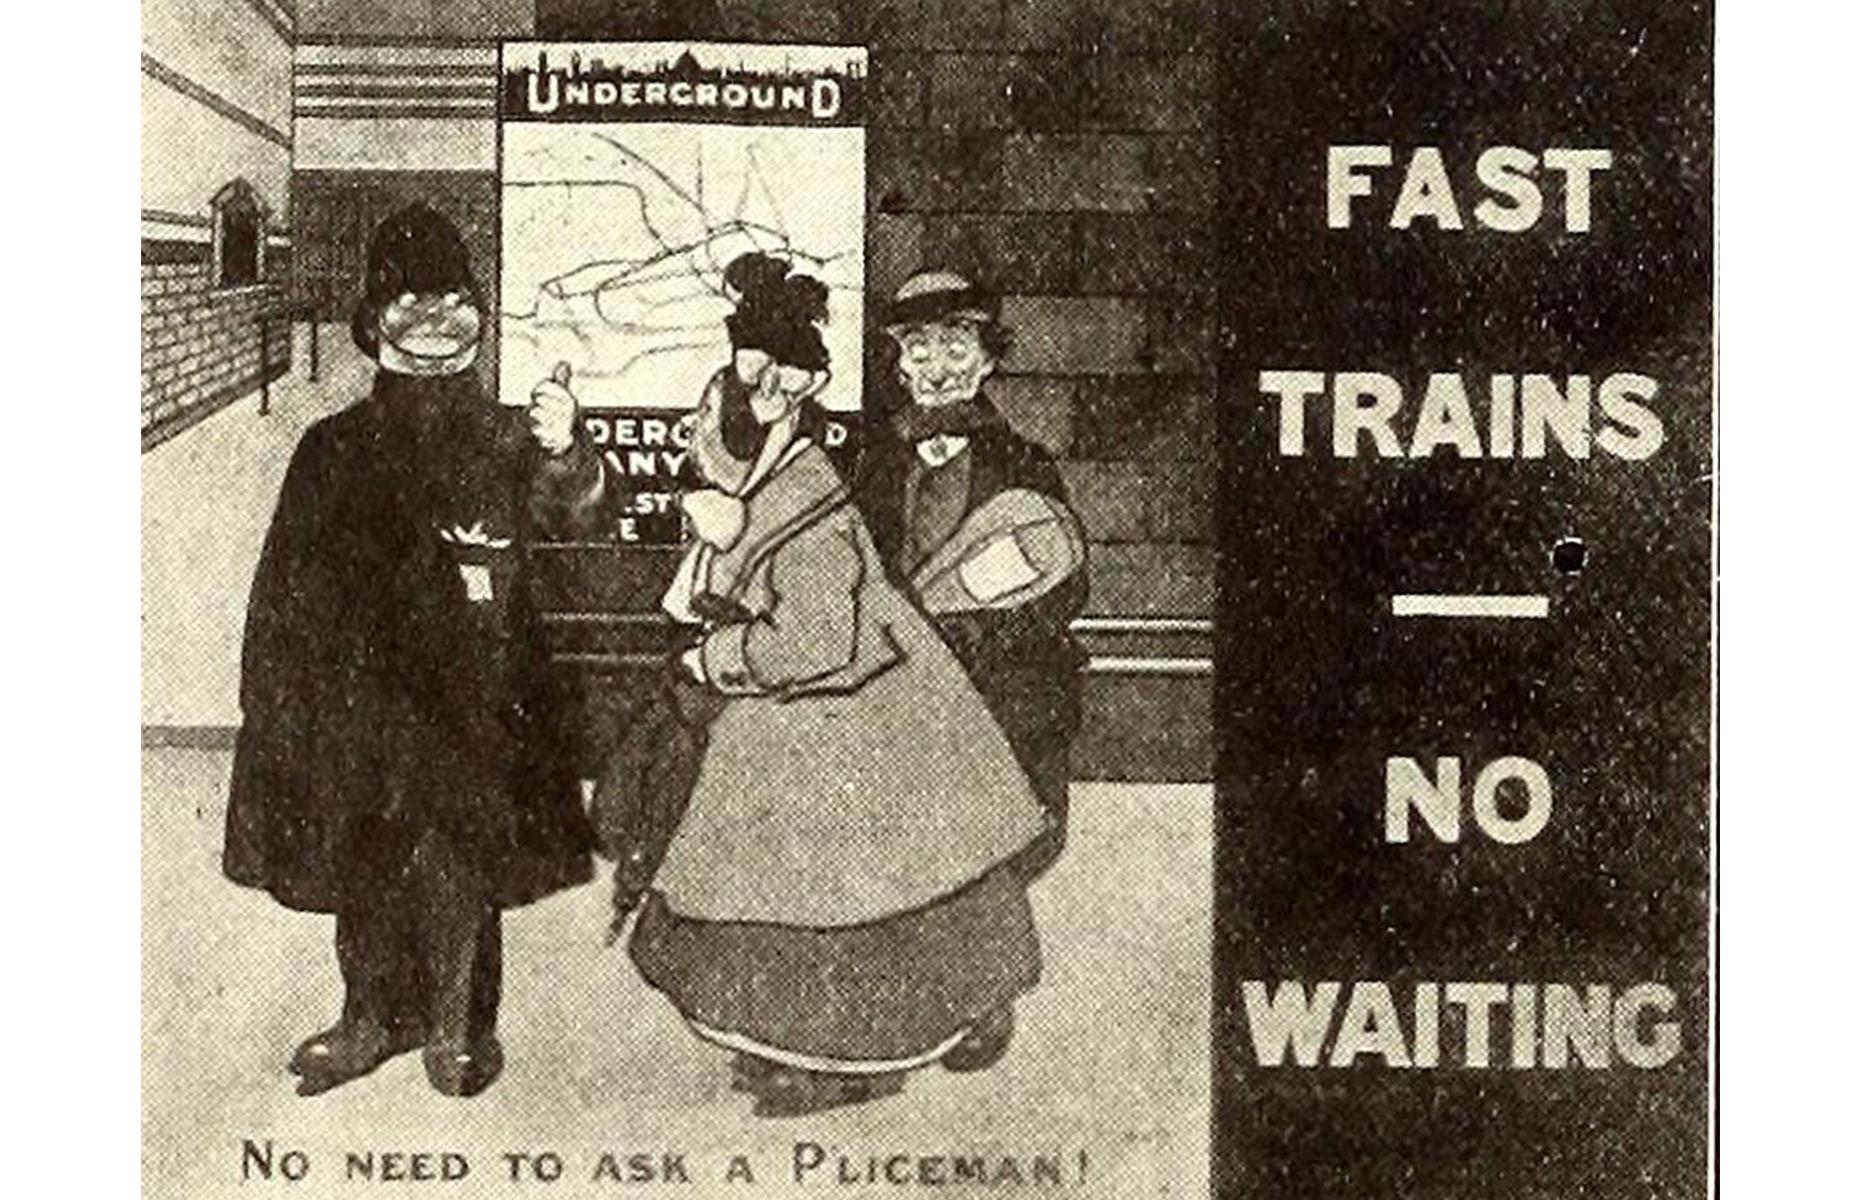 The London Underground system saw some major milestones through the early 20th century too. The District and Circle lines became electrified in 1905 and sections of the modern-day Bakerloo and Piccadilly lines opened up. This 1908 cartoon advert dubs the service the quickest way to zip around the city.